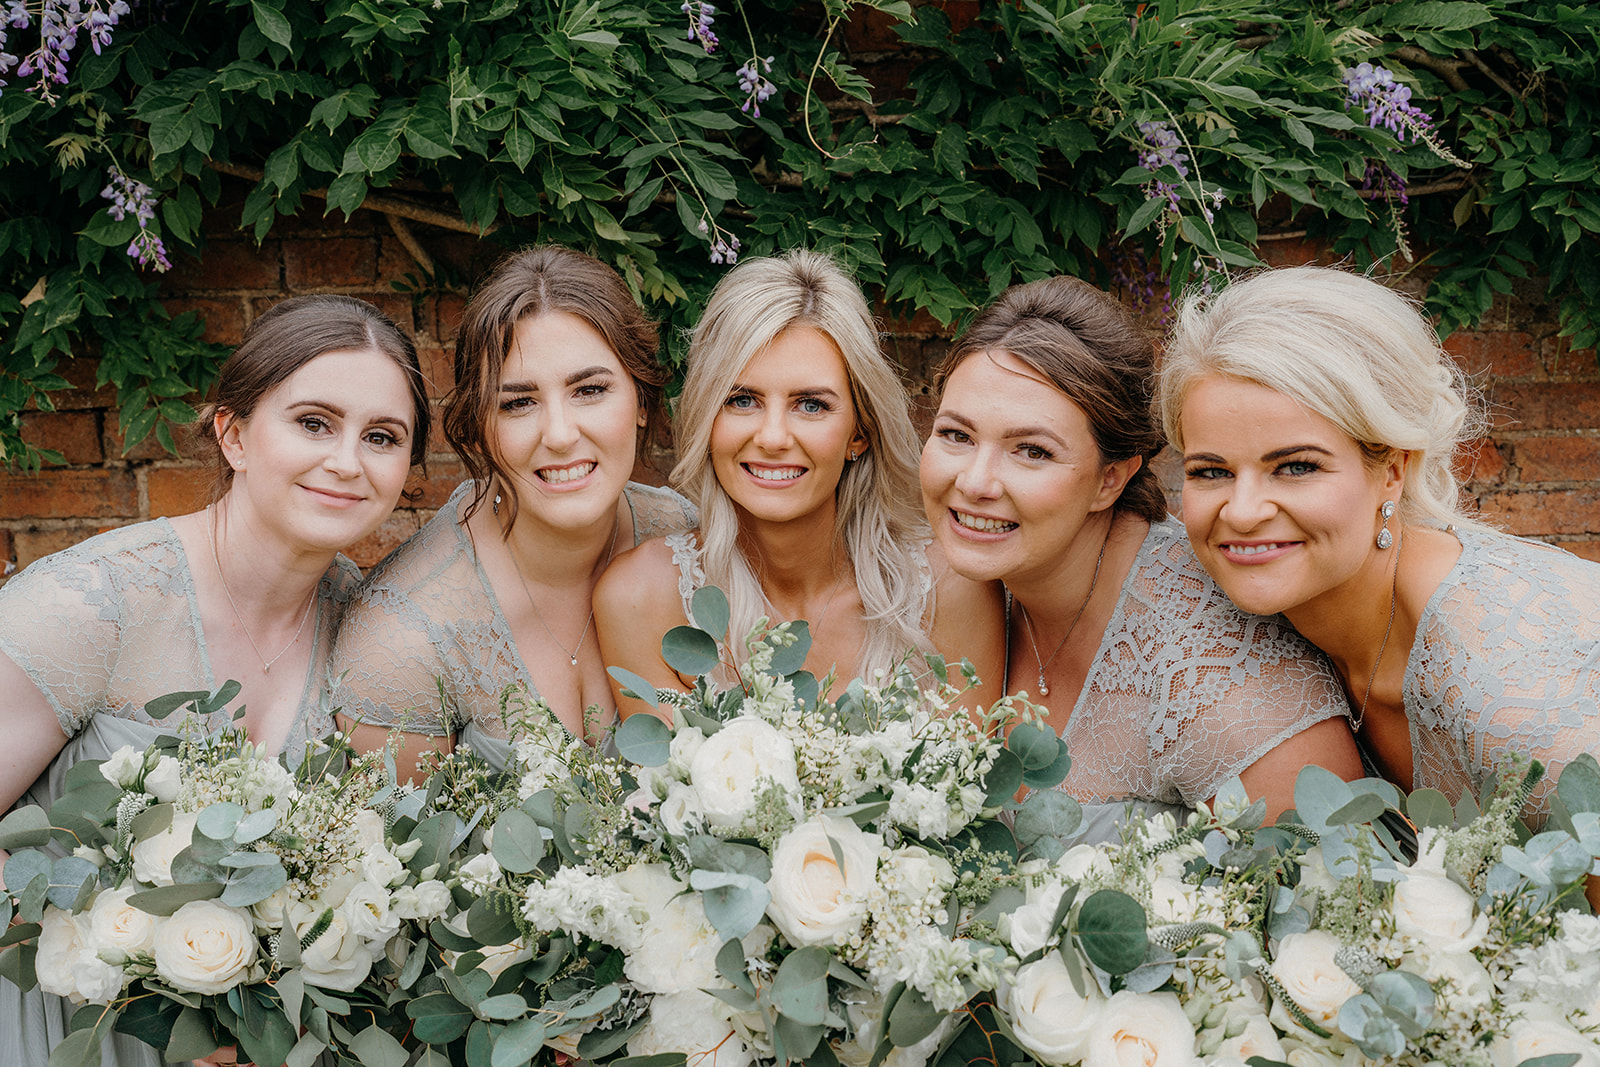 Bridesmaids all together with big smiles on their faces.